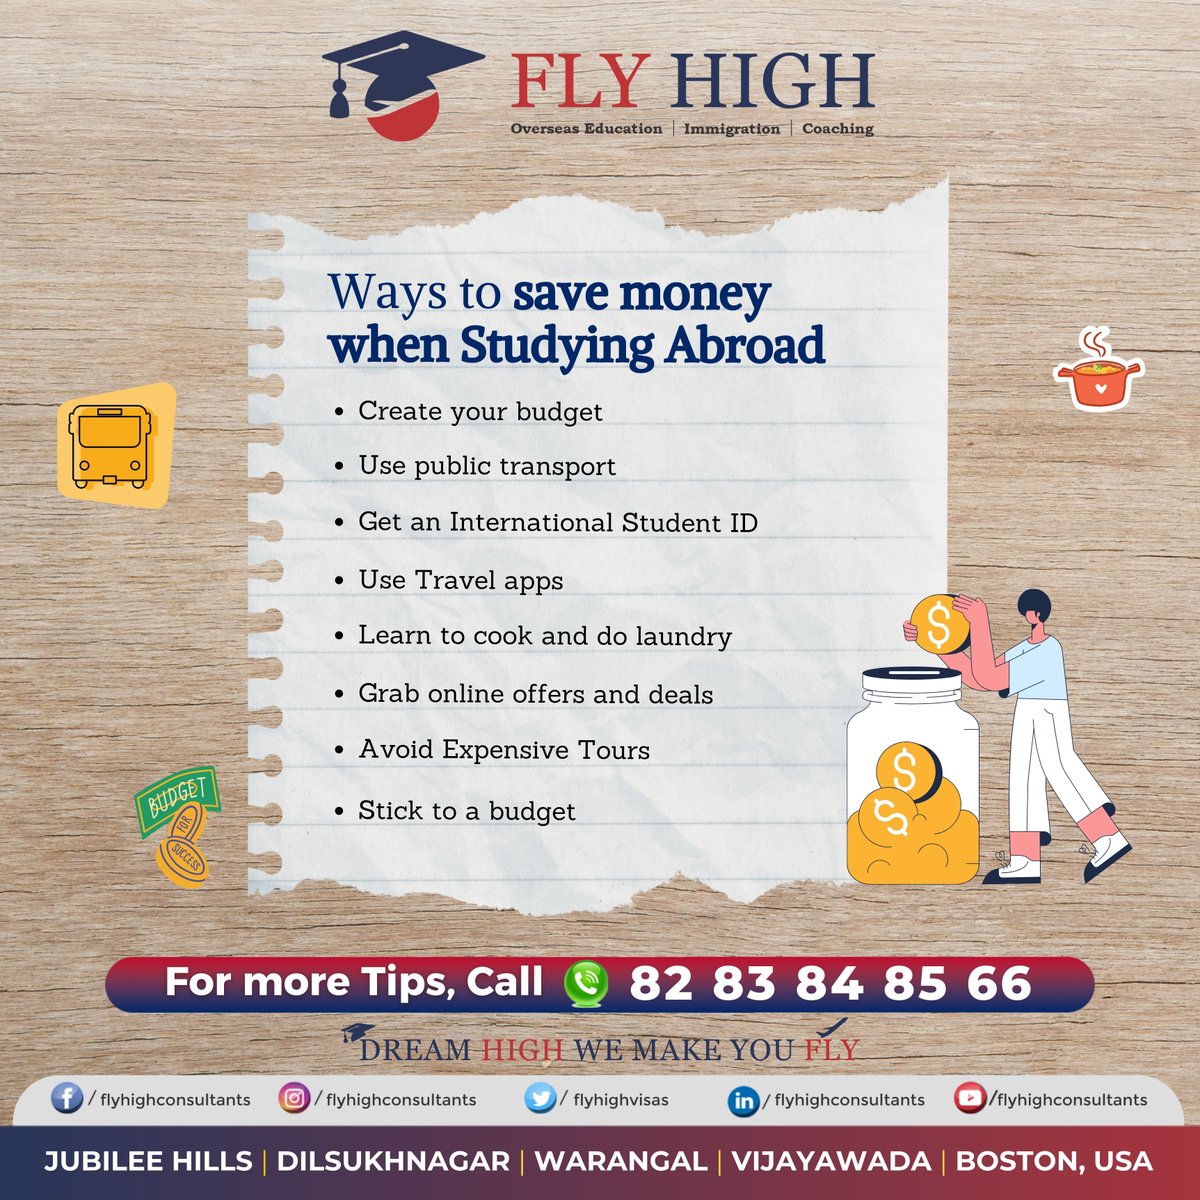 Want to #studyabroad without breaking the bank?
Here are some savvy tips to save money while pursuing your #internationaleducation dreams-
Don't let financial constraints hold you back from experiencing the adventure of a lifetime!
Contact us at  8283848566
#flyhighconsultants